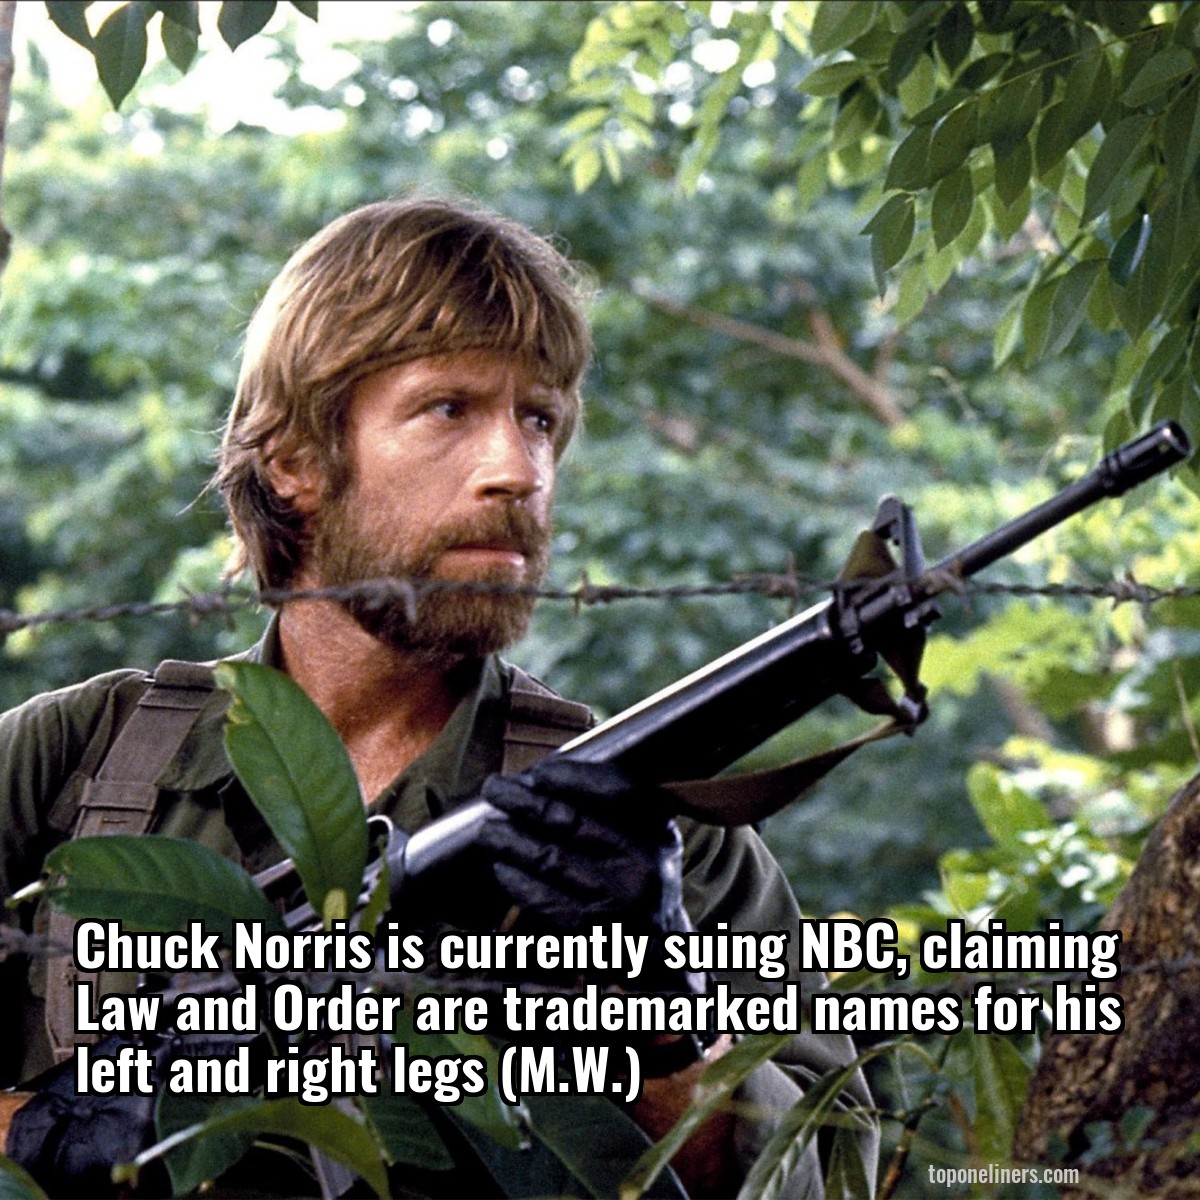 Chuck Norris is currently suing NBC, claiming Law and Order are trademarked names for his left and right legs (M.W.)